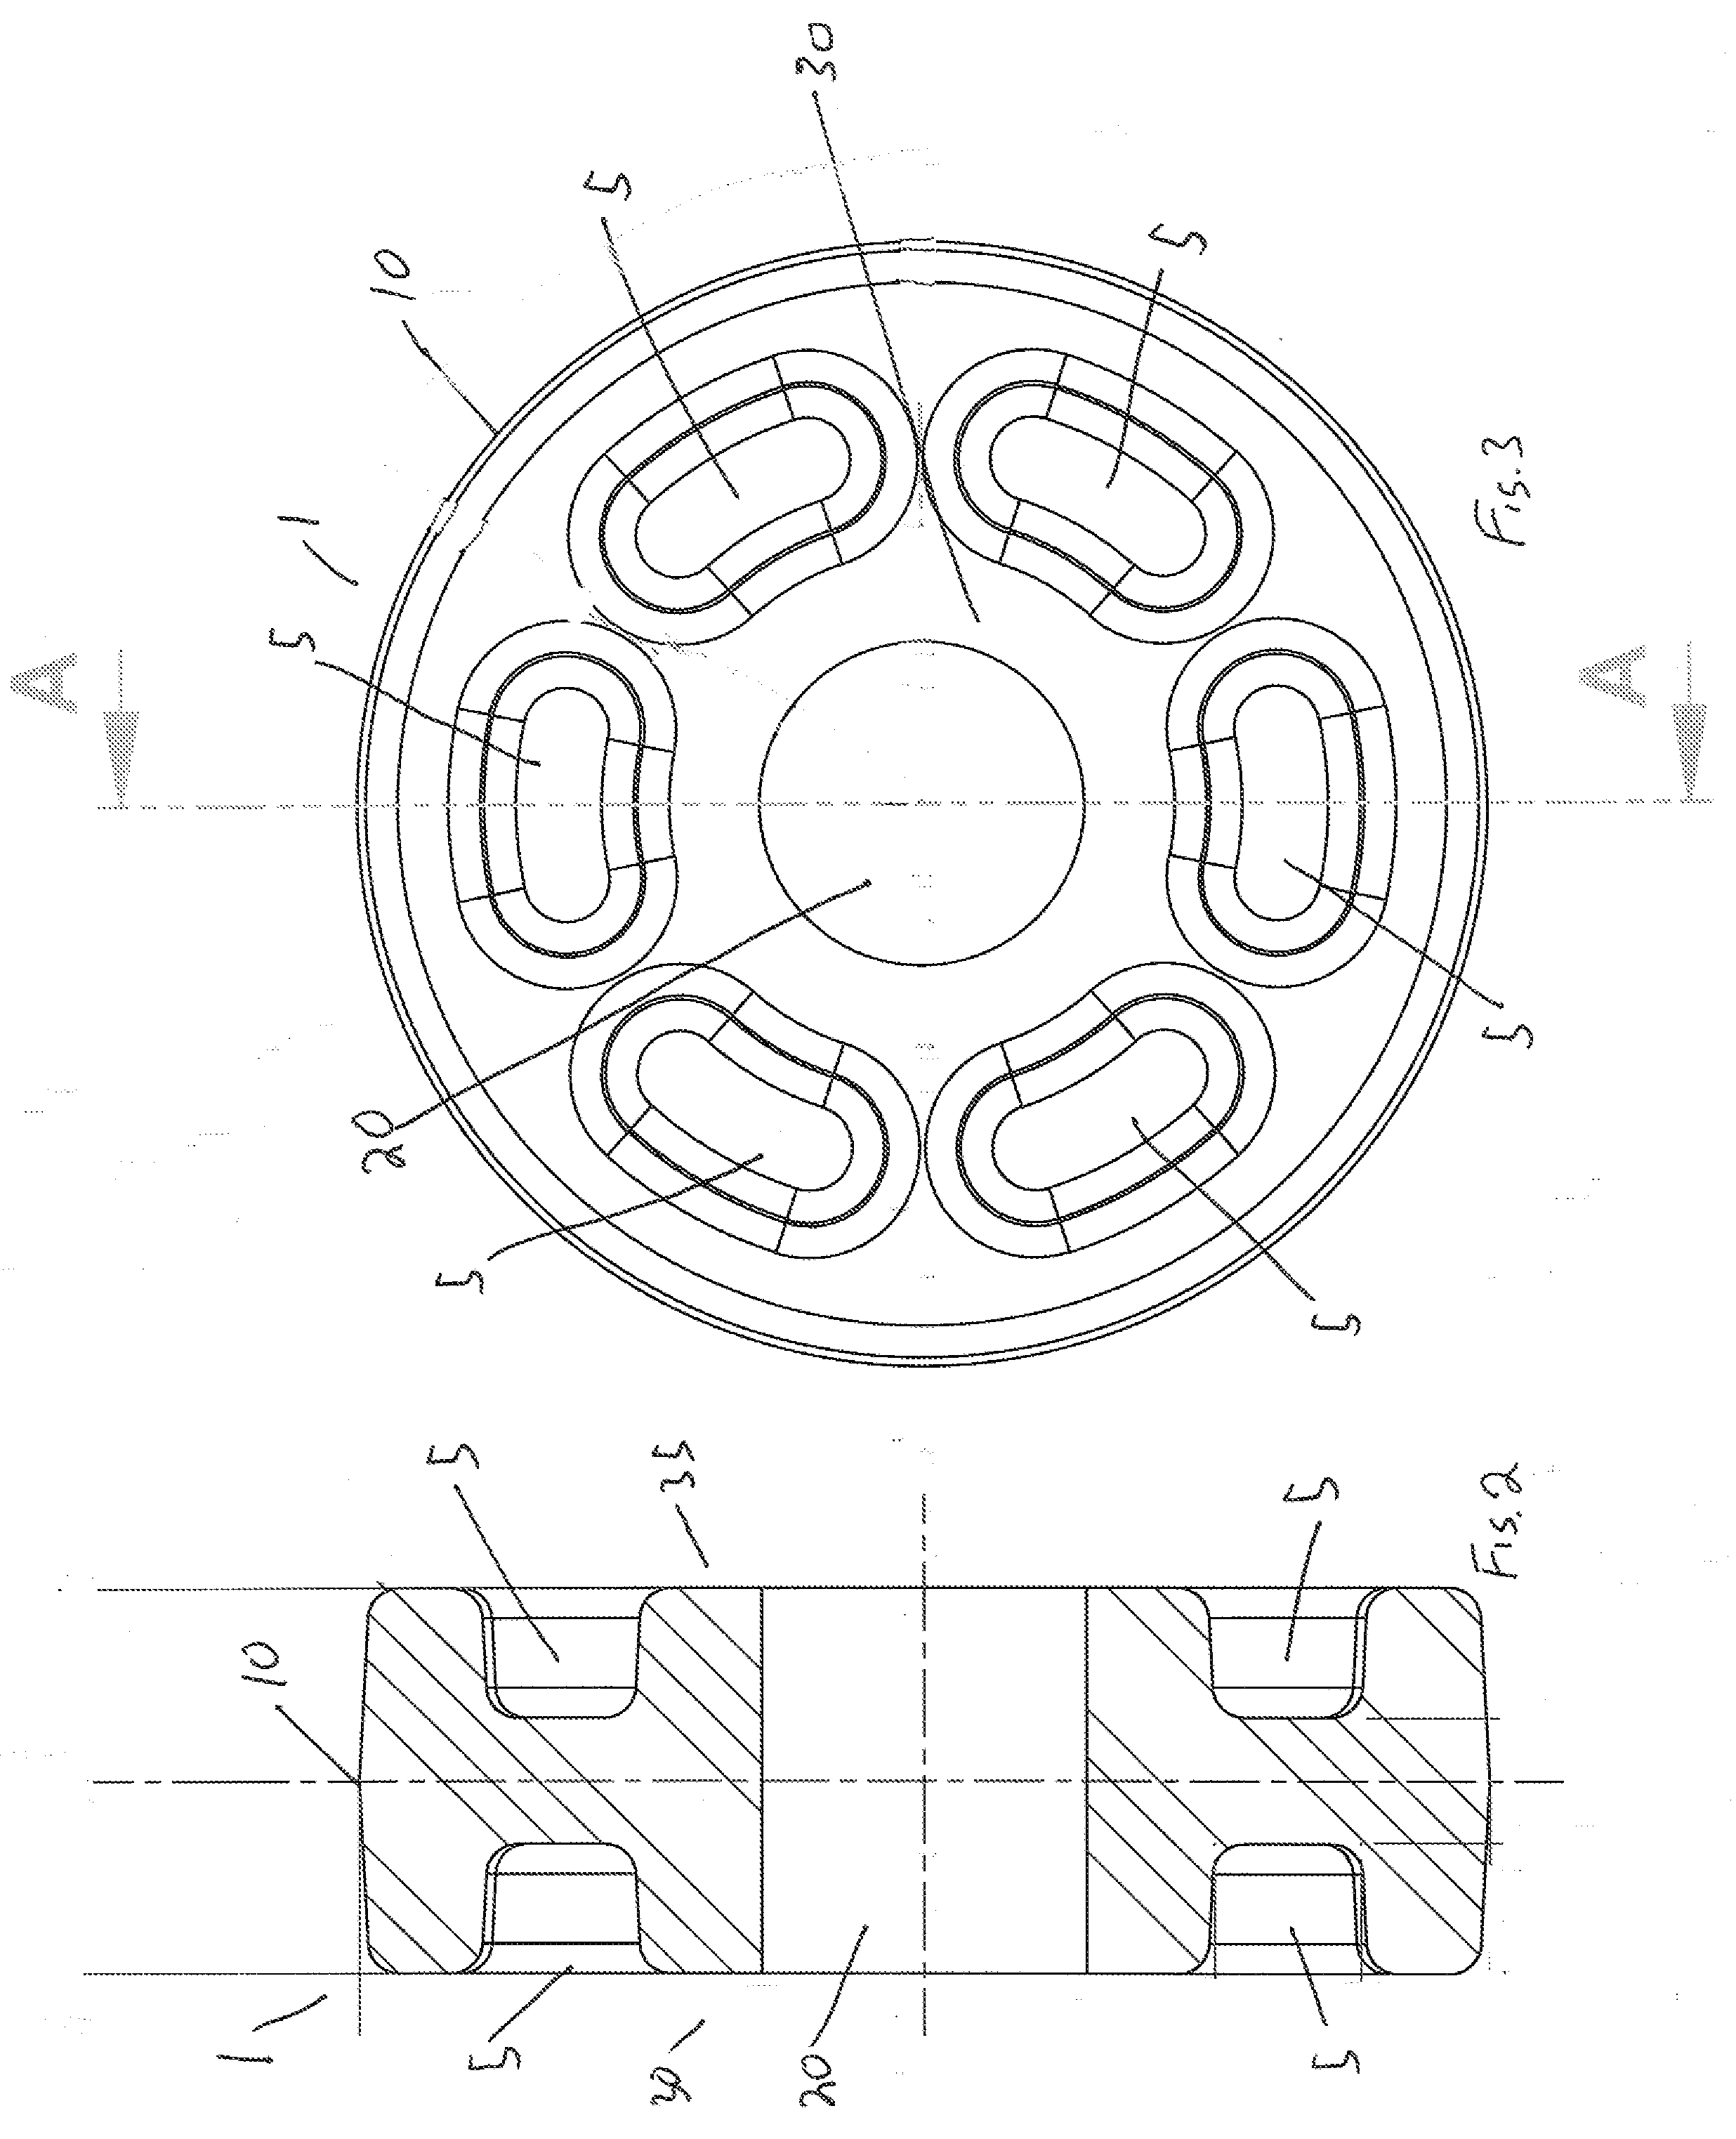 Coaxial RF Device Thermally Conductive Polymer Insulator and Method of Manufacture